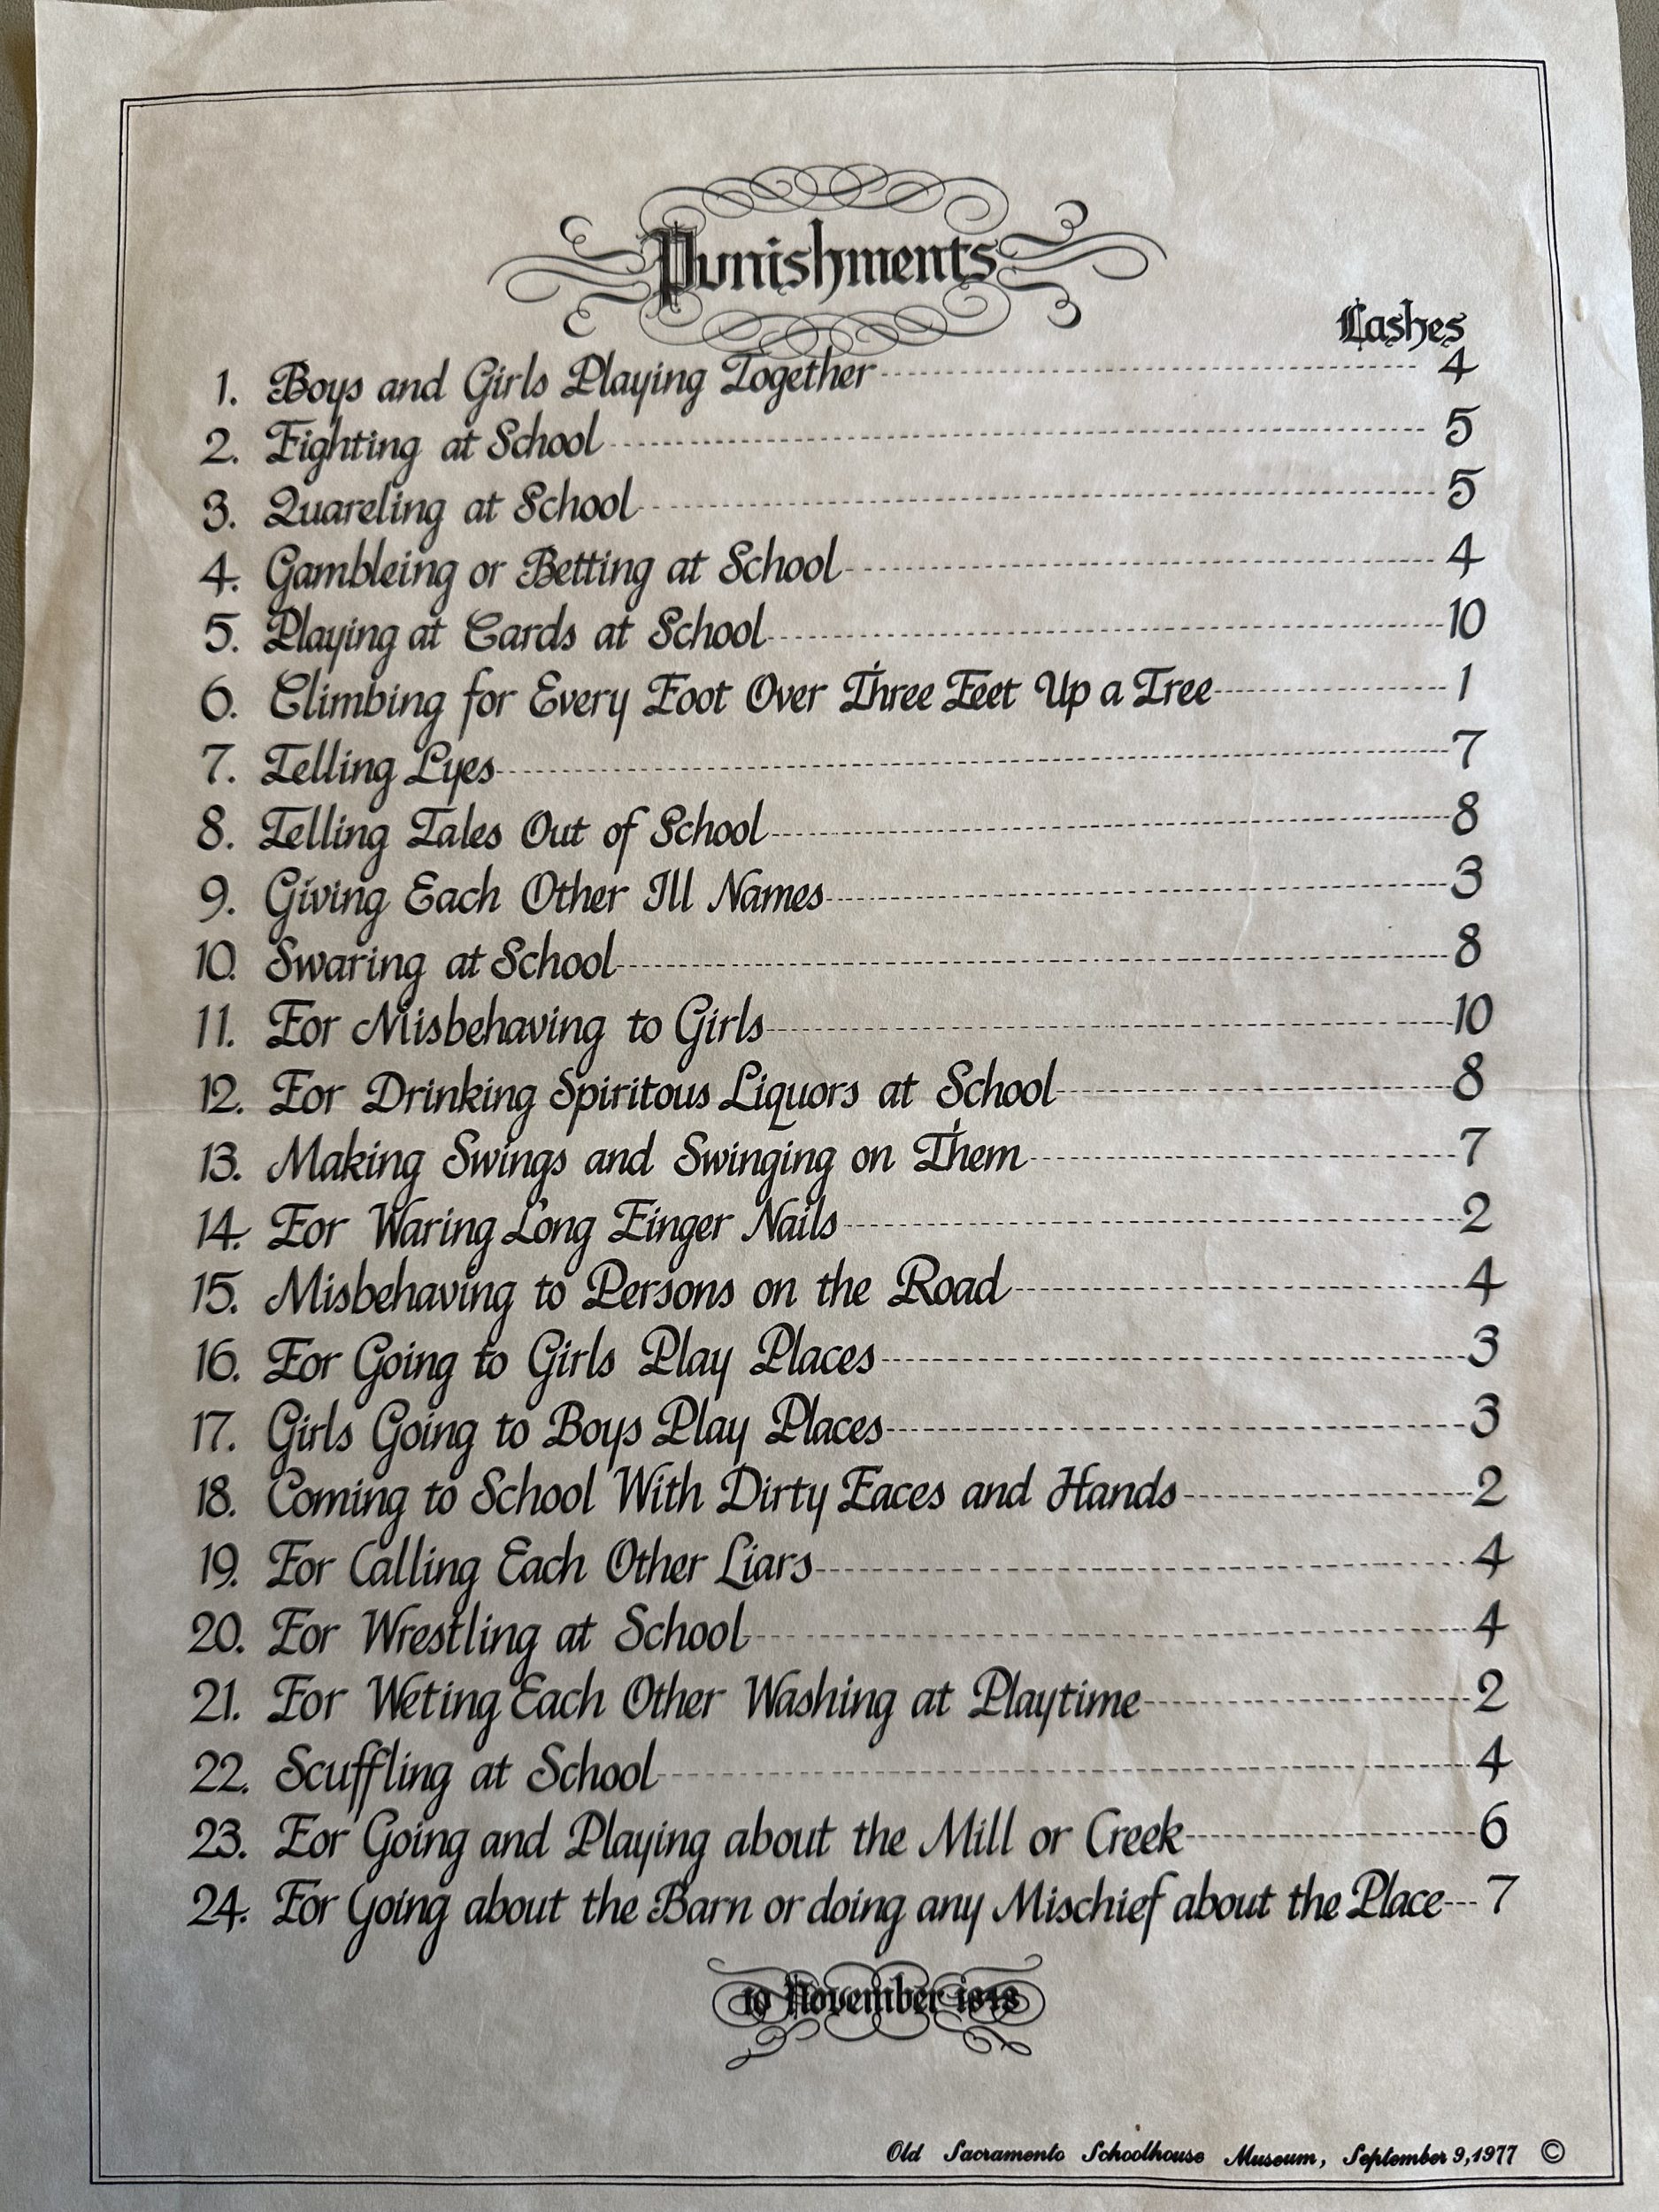 List of punishment rules for teachers from the 1848. This sheet was purchased by Denise M. Colby on a trip to the Old Sacramento Museum